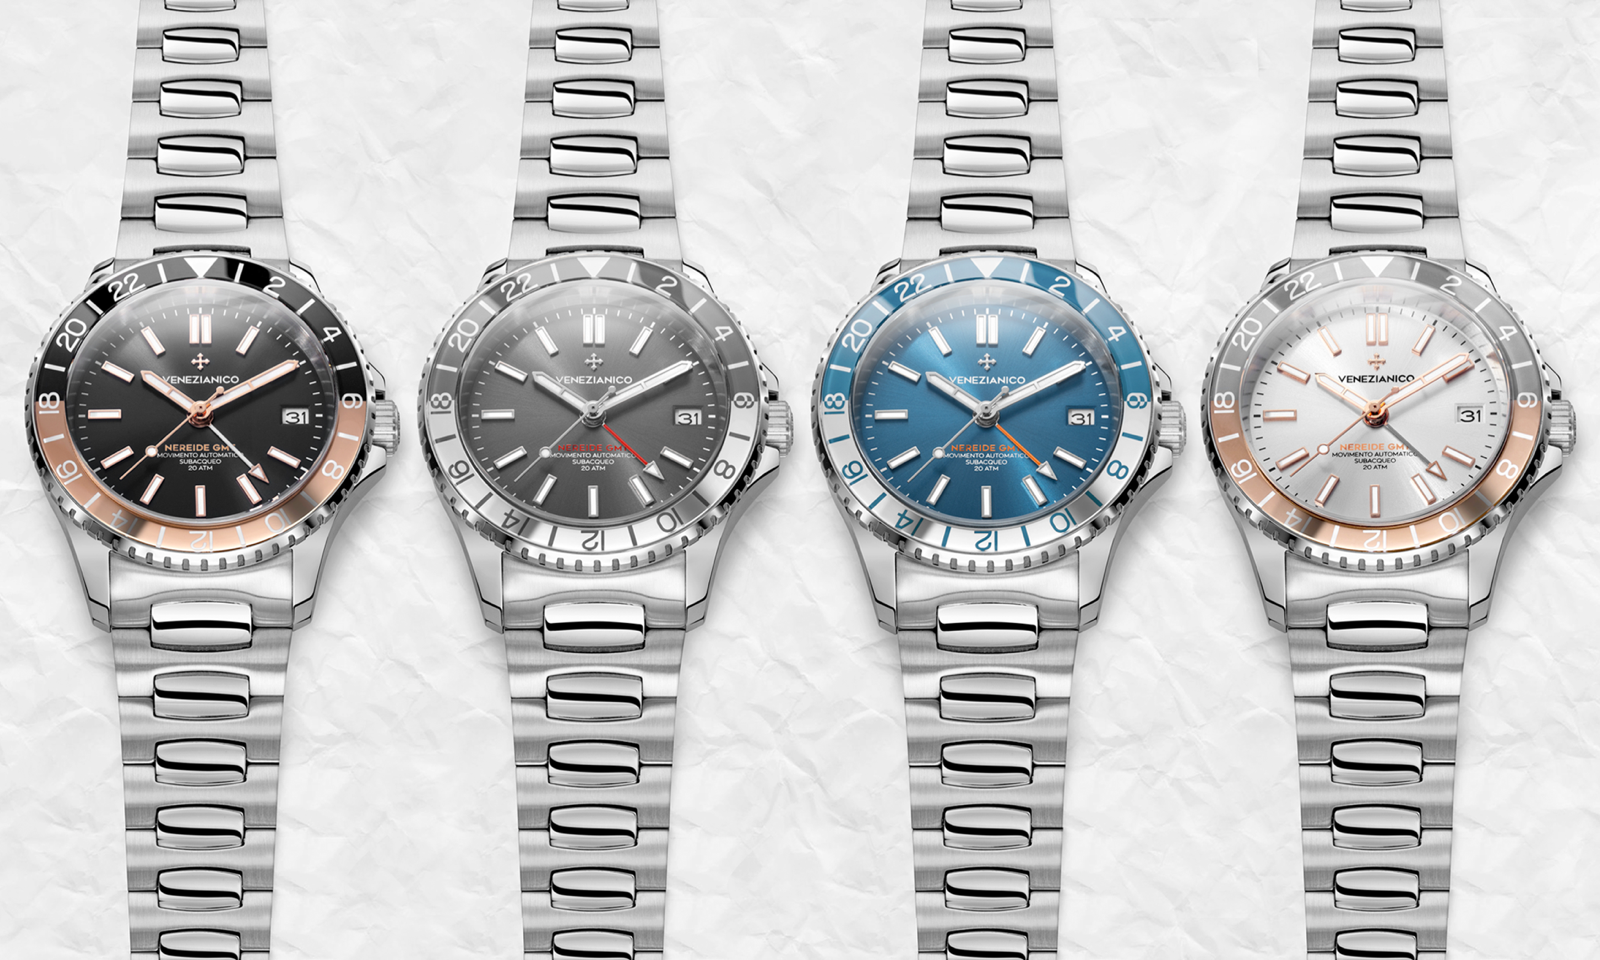 Nerneide GMT 39 Collection